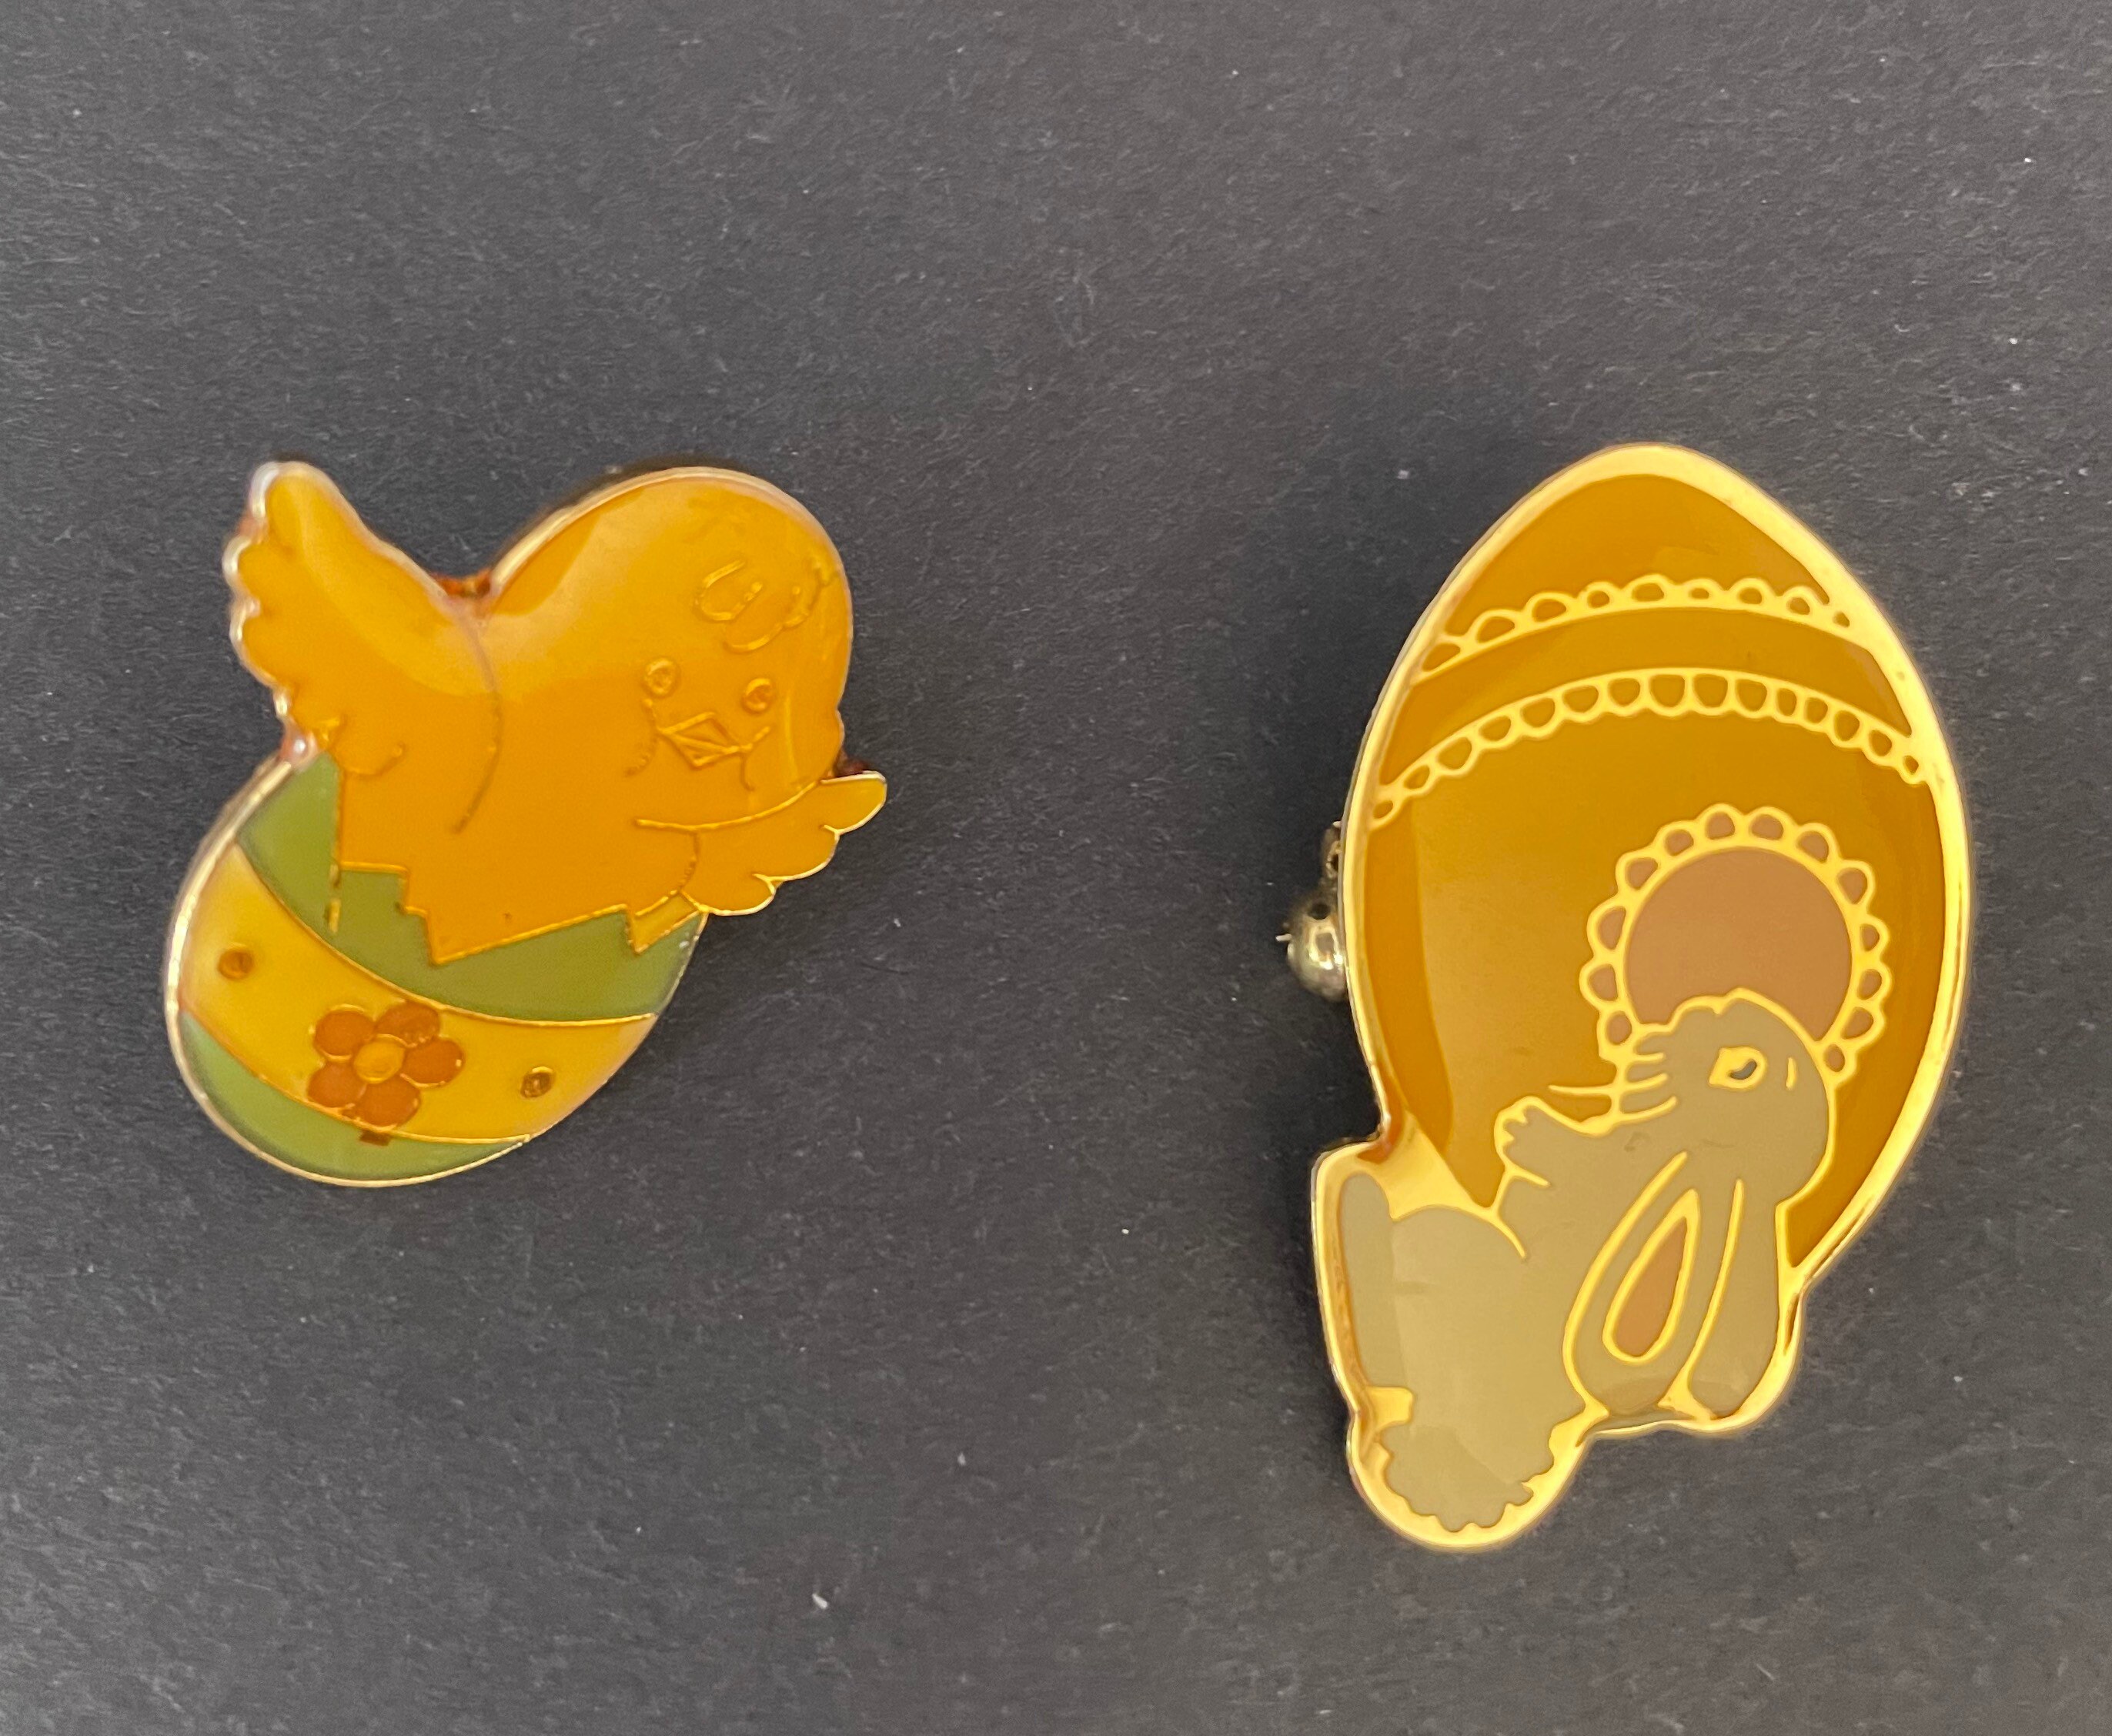 Details about   Vintage Enameled Metal Chick Hatching From Egg Tie Tac Pin 